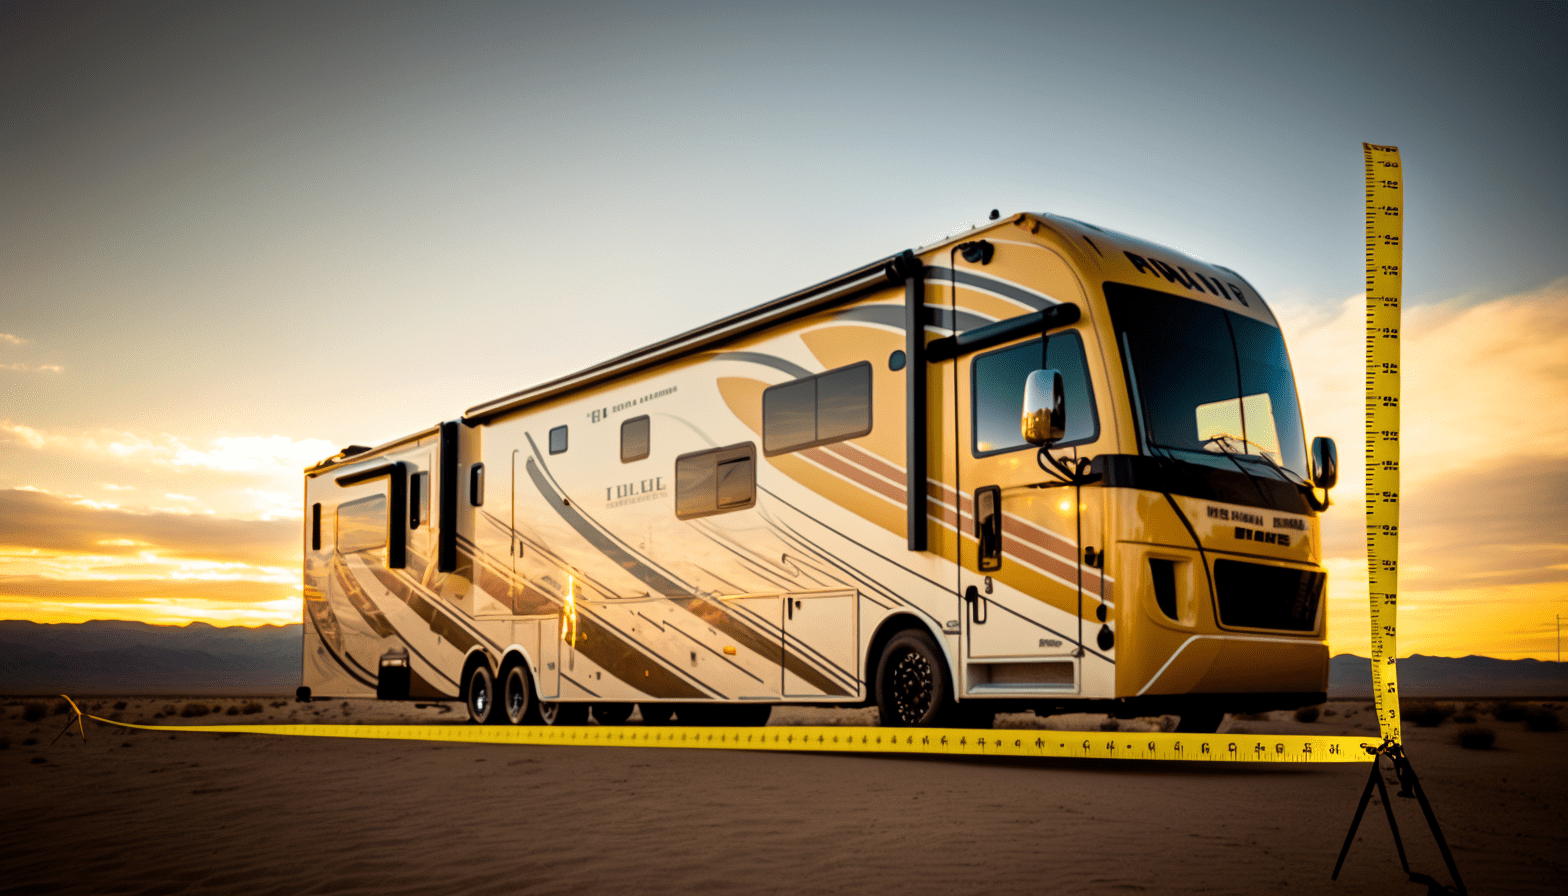 How Wide Is An RV? A Guide to RV Widths & Measurements